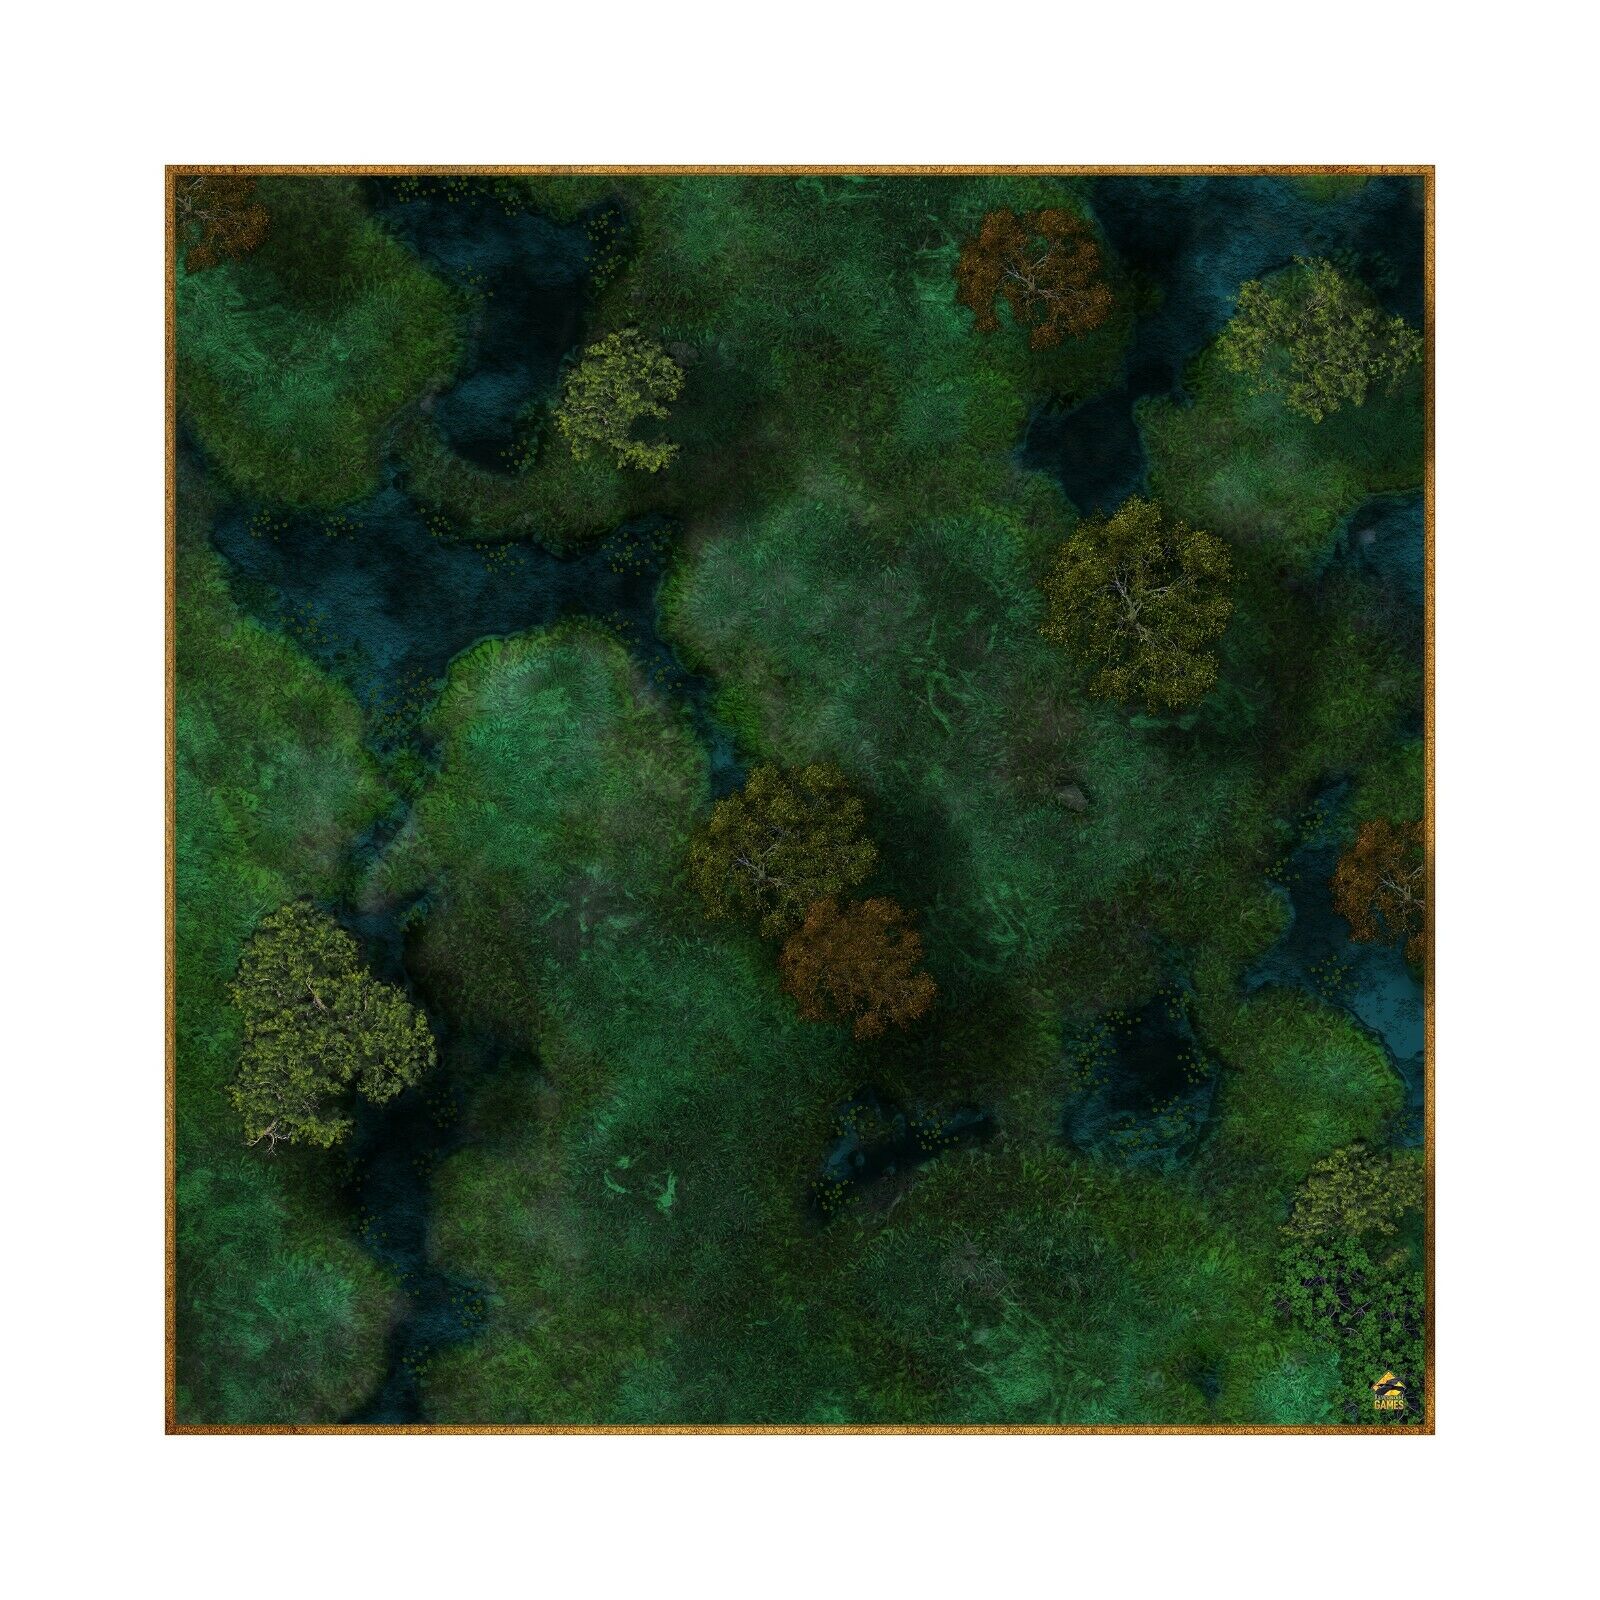 Swamp Designs 001 - 36" x 36" Battle Mat for Table Top RPGs, Dungeons and Dragons, Pathfinder Etc.